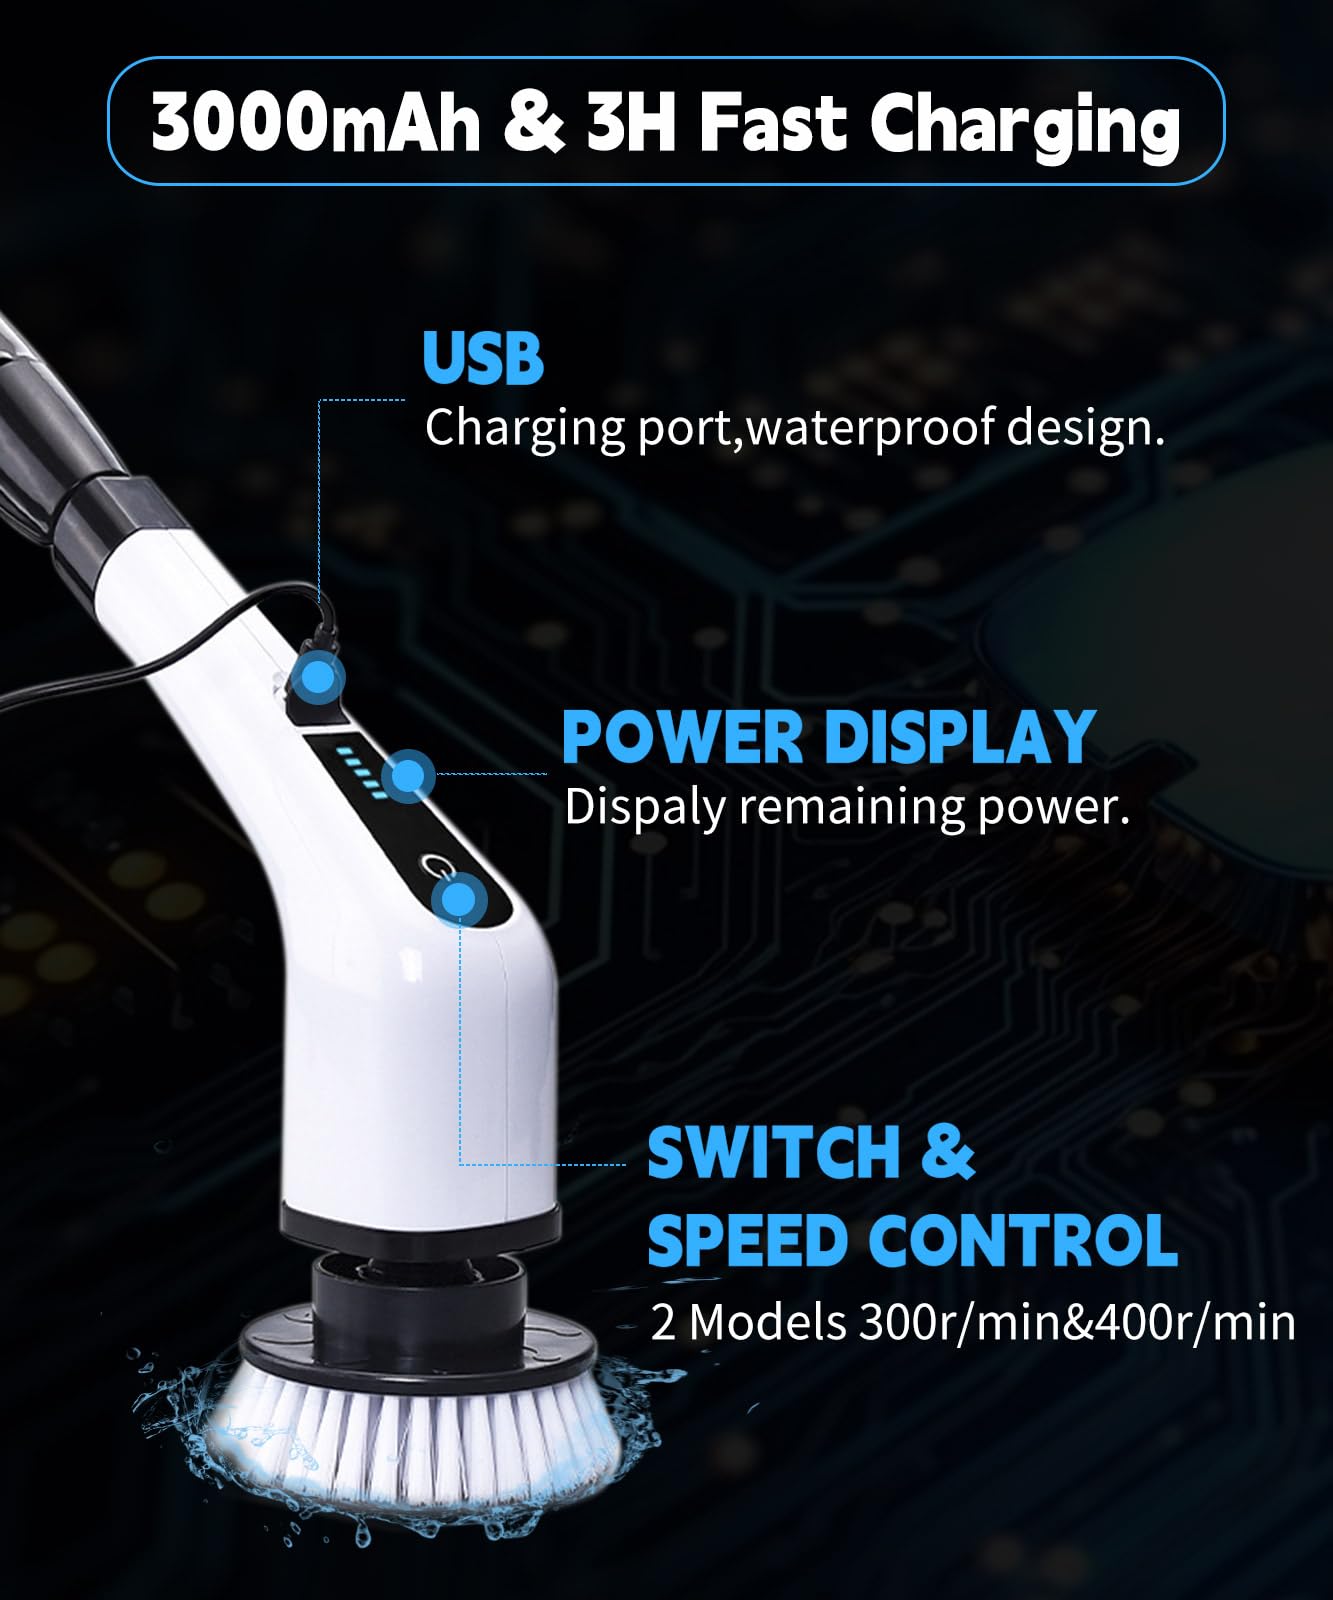 Electric Spin Scrubber Cleaning Brush: Cordless Power Shower Scrubber for Cleaning Bathroom Tub Tiles Car with Long Handle | Portable E Spin Bathtub Spinning Cleaner Scrub Brush Household Use Supplies